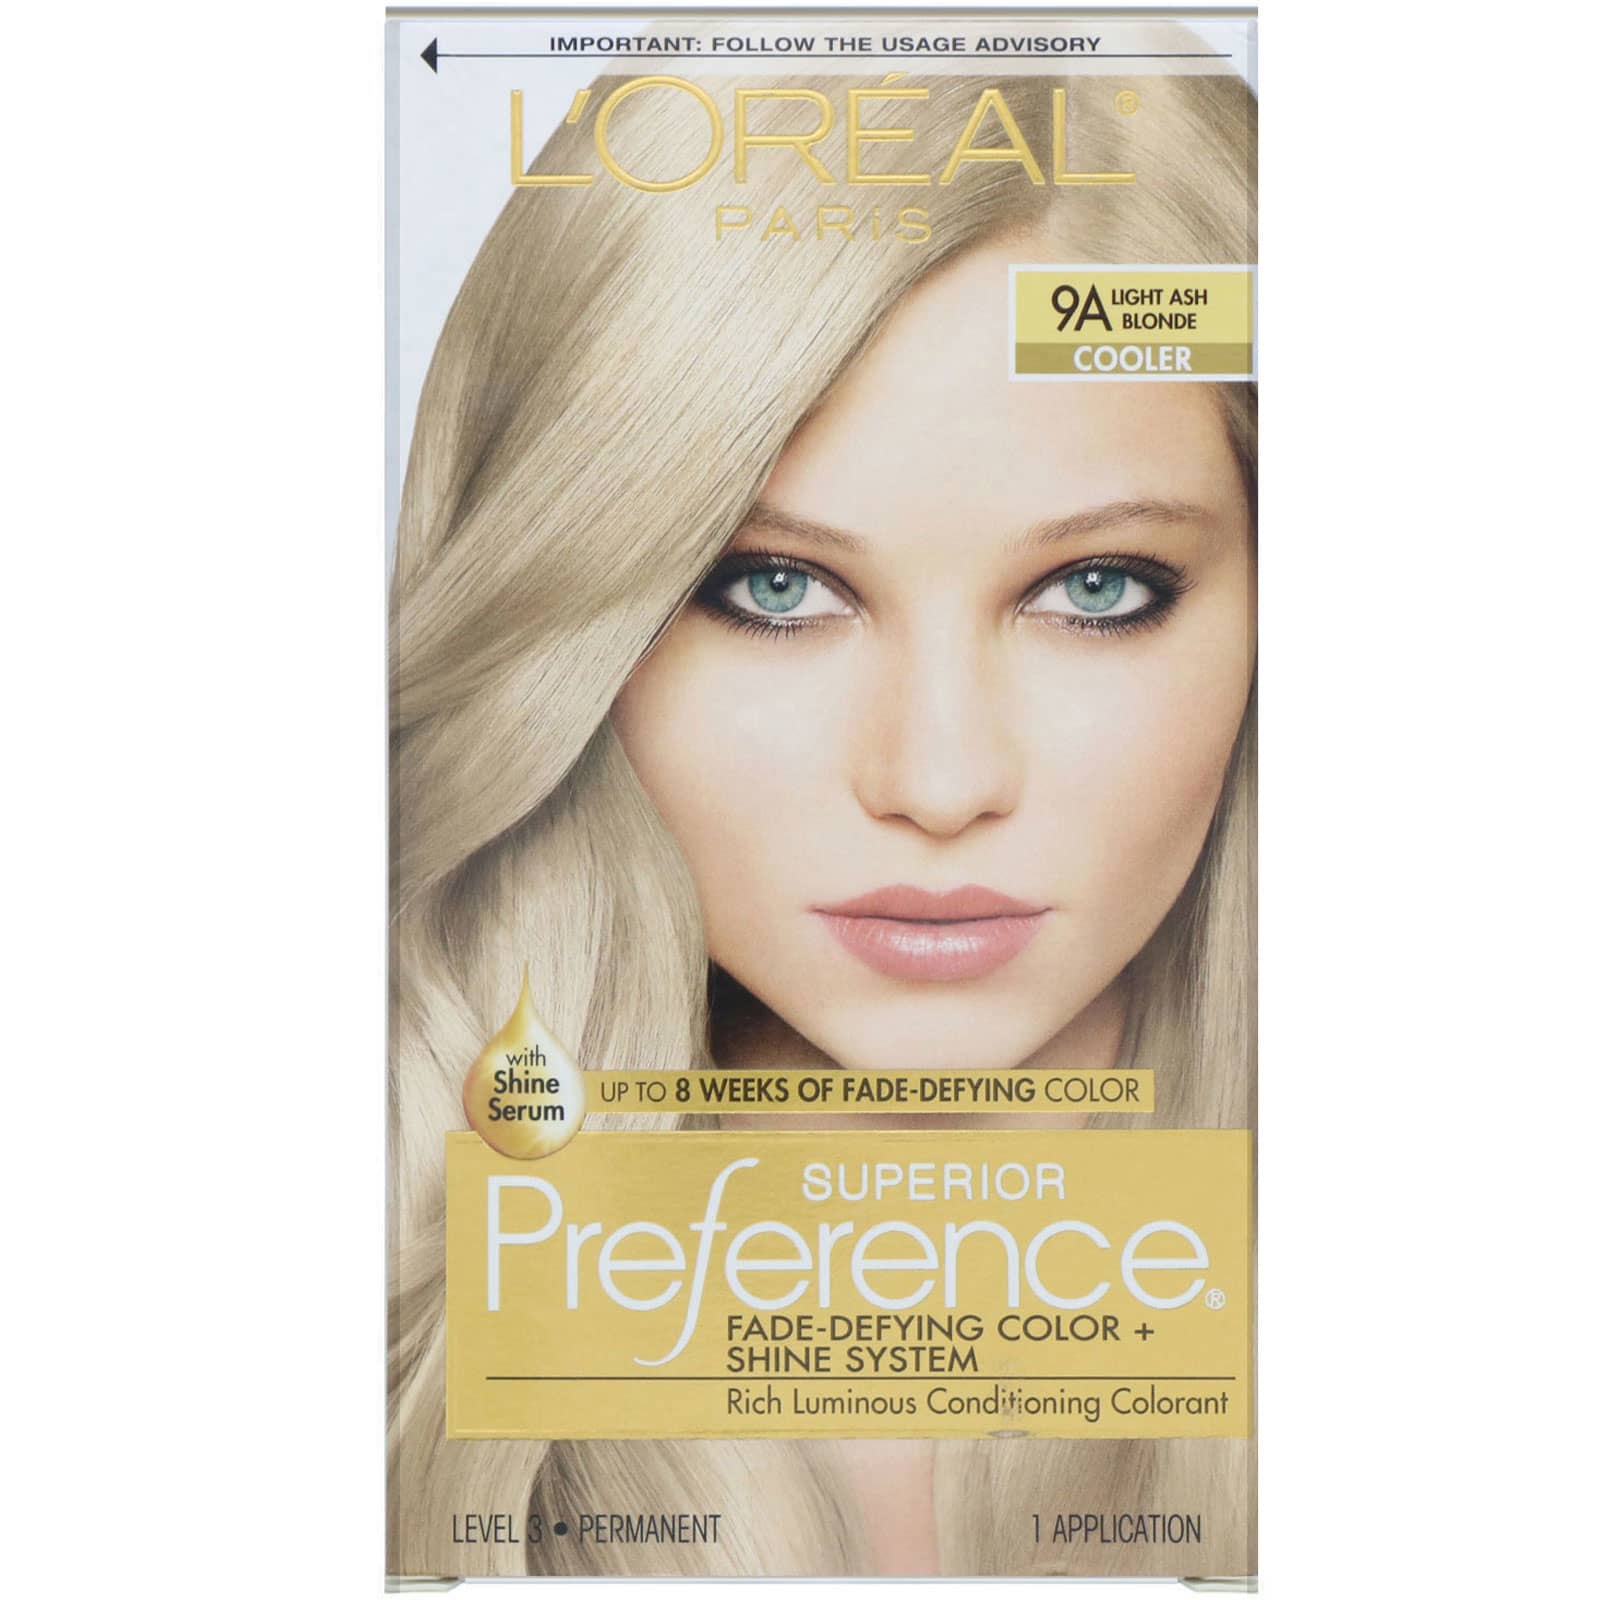 L'Oreal, Superior Preference, Fade-Defying Color + Shine System, Cooler. Light  Ash Blonde 9A, 1 Application (Discontinued Item)